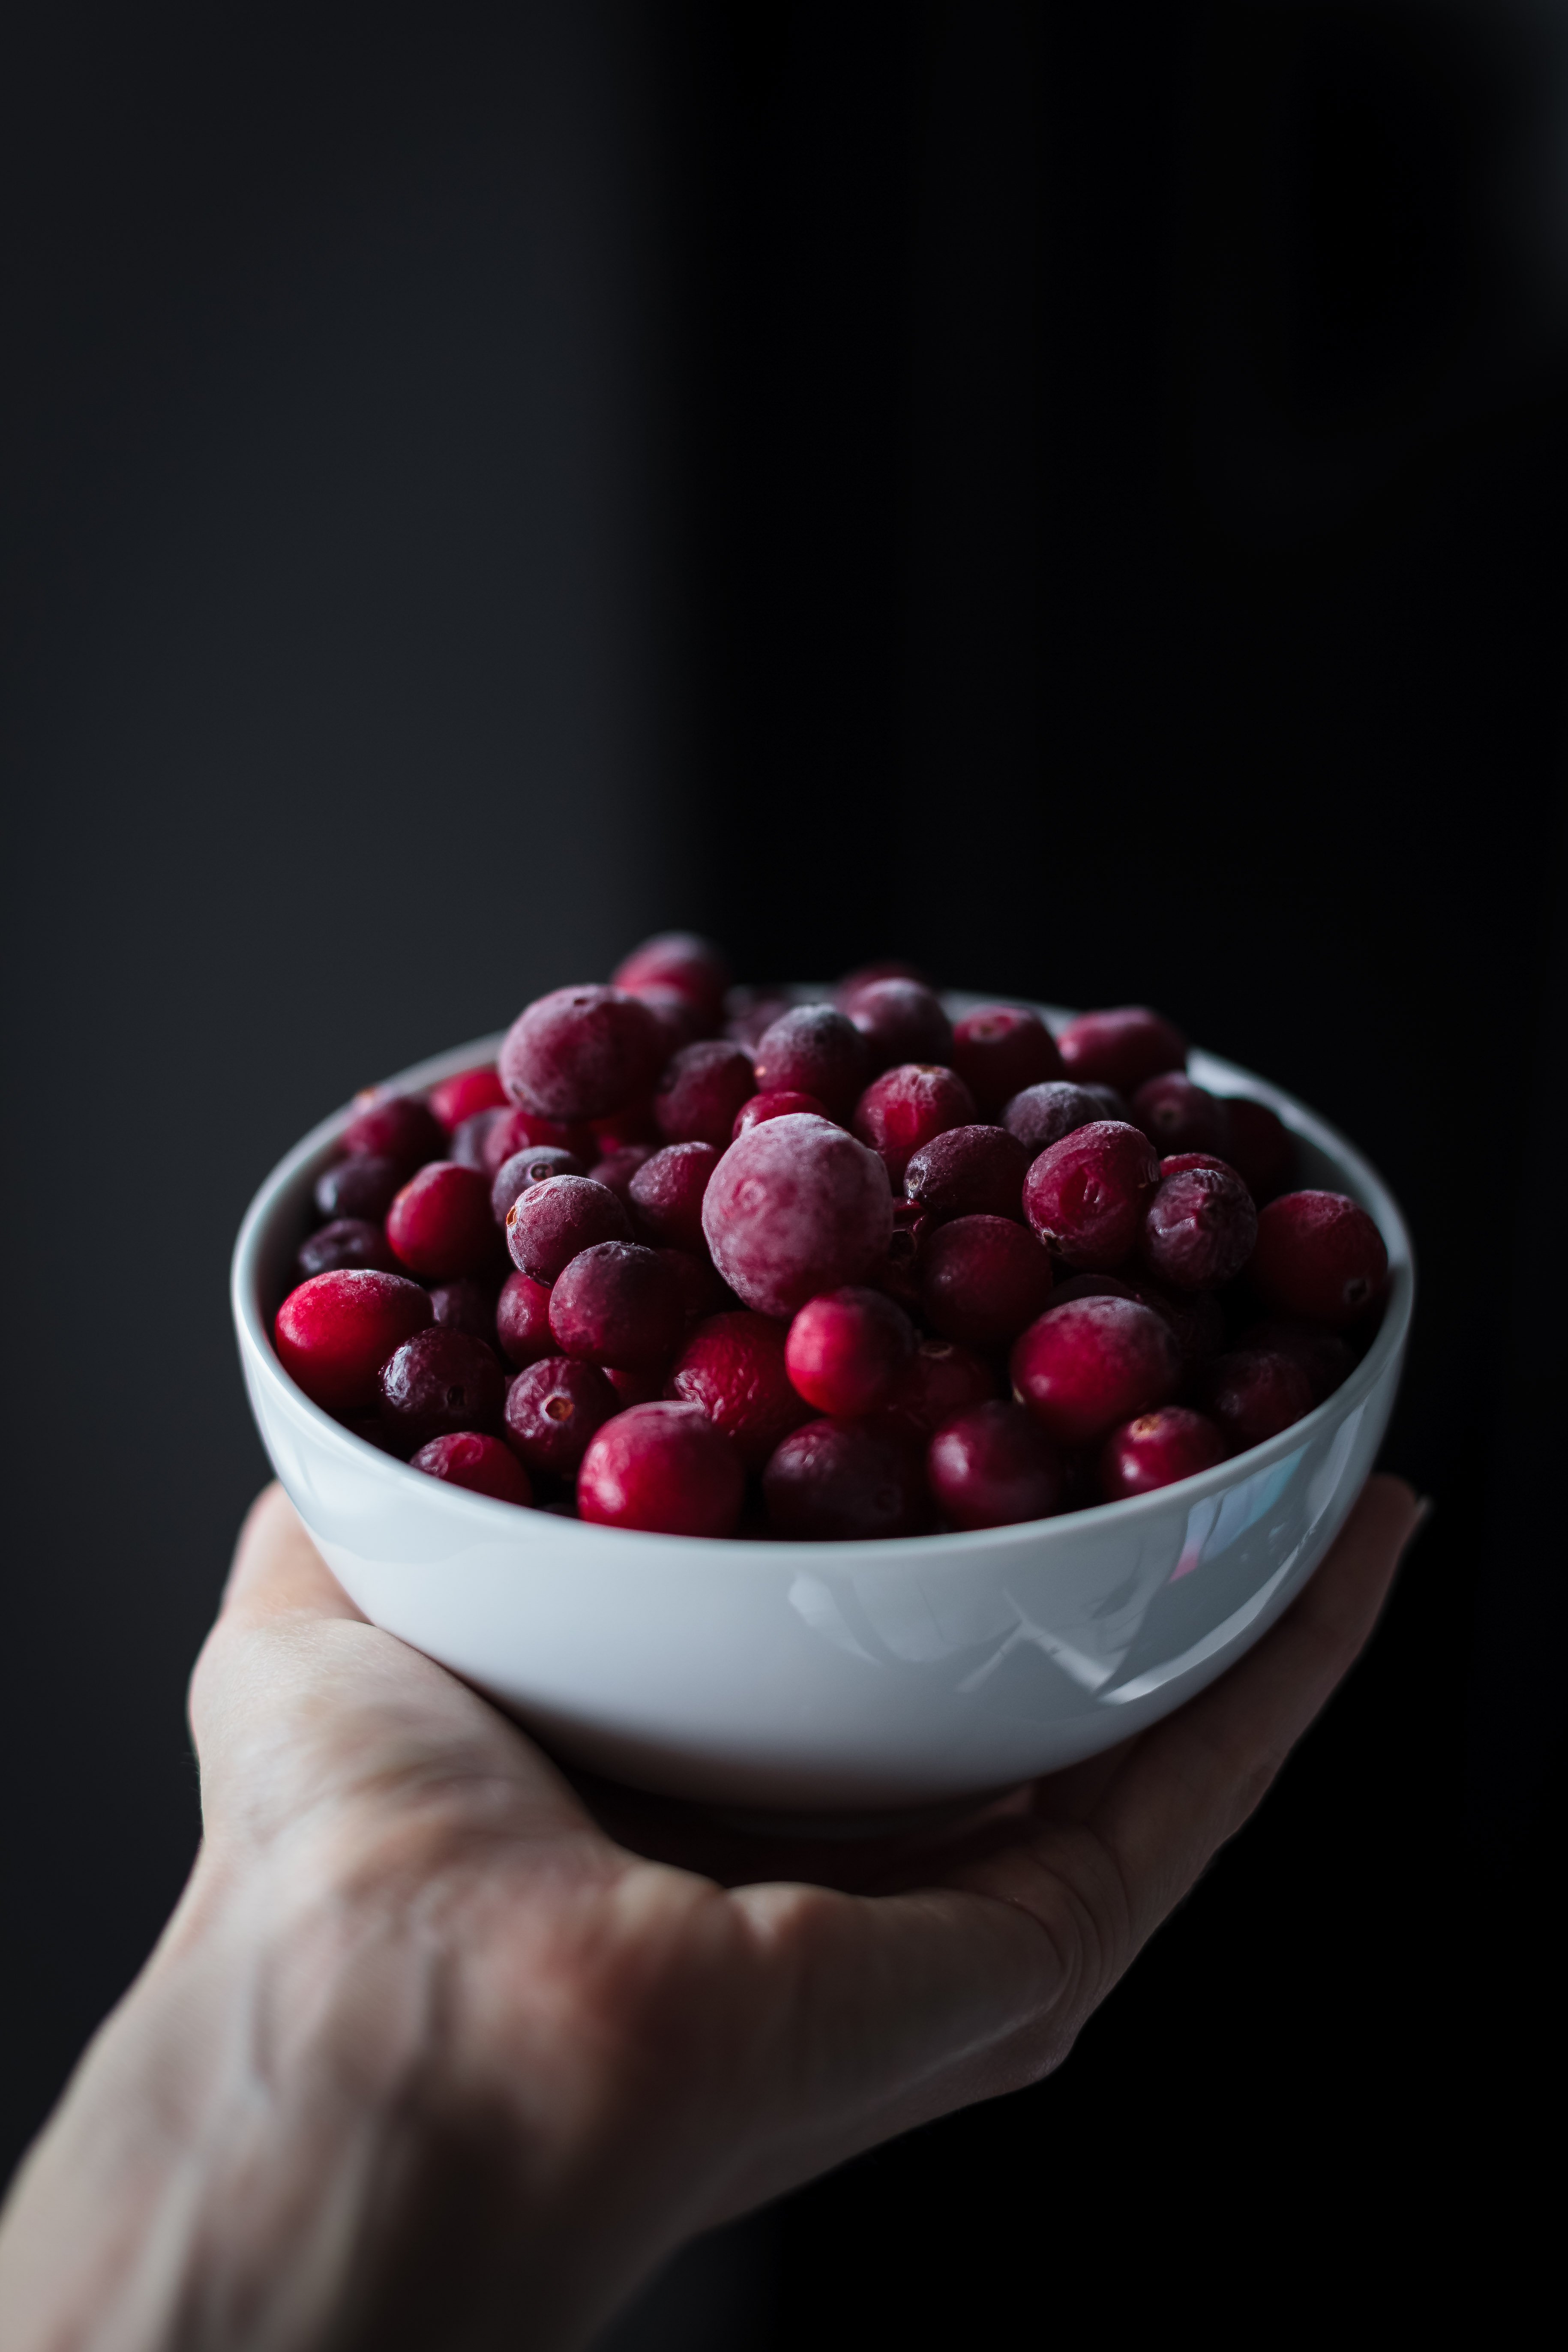 A head on image of a hand holding a bowl of frozen cranberries.